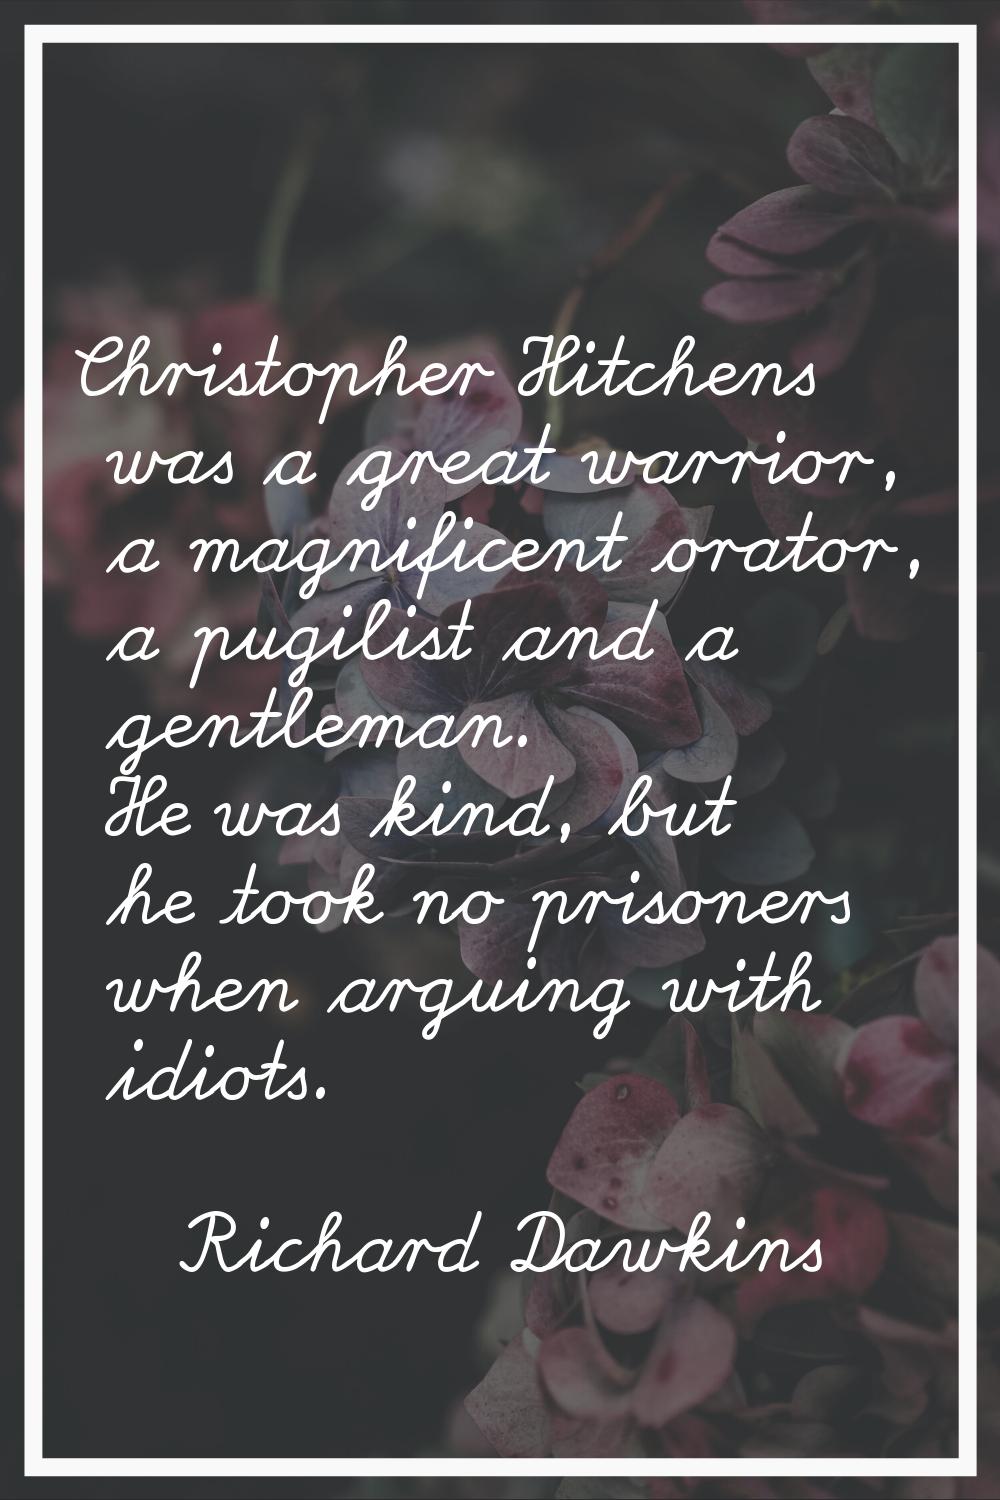 Christopher Hitchens was a great warrior, a magnificent orator, a pugilist and a gentleman. He was 